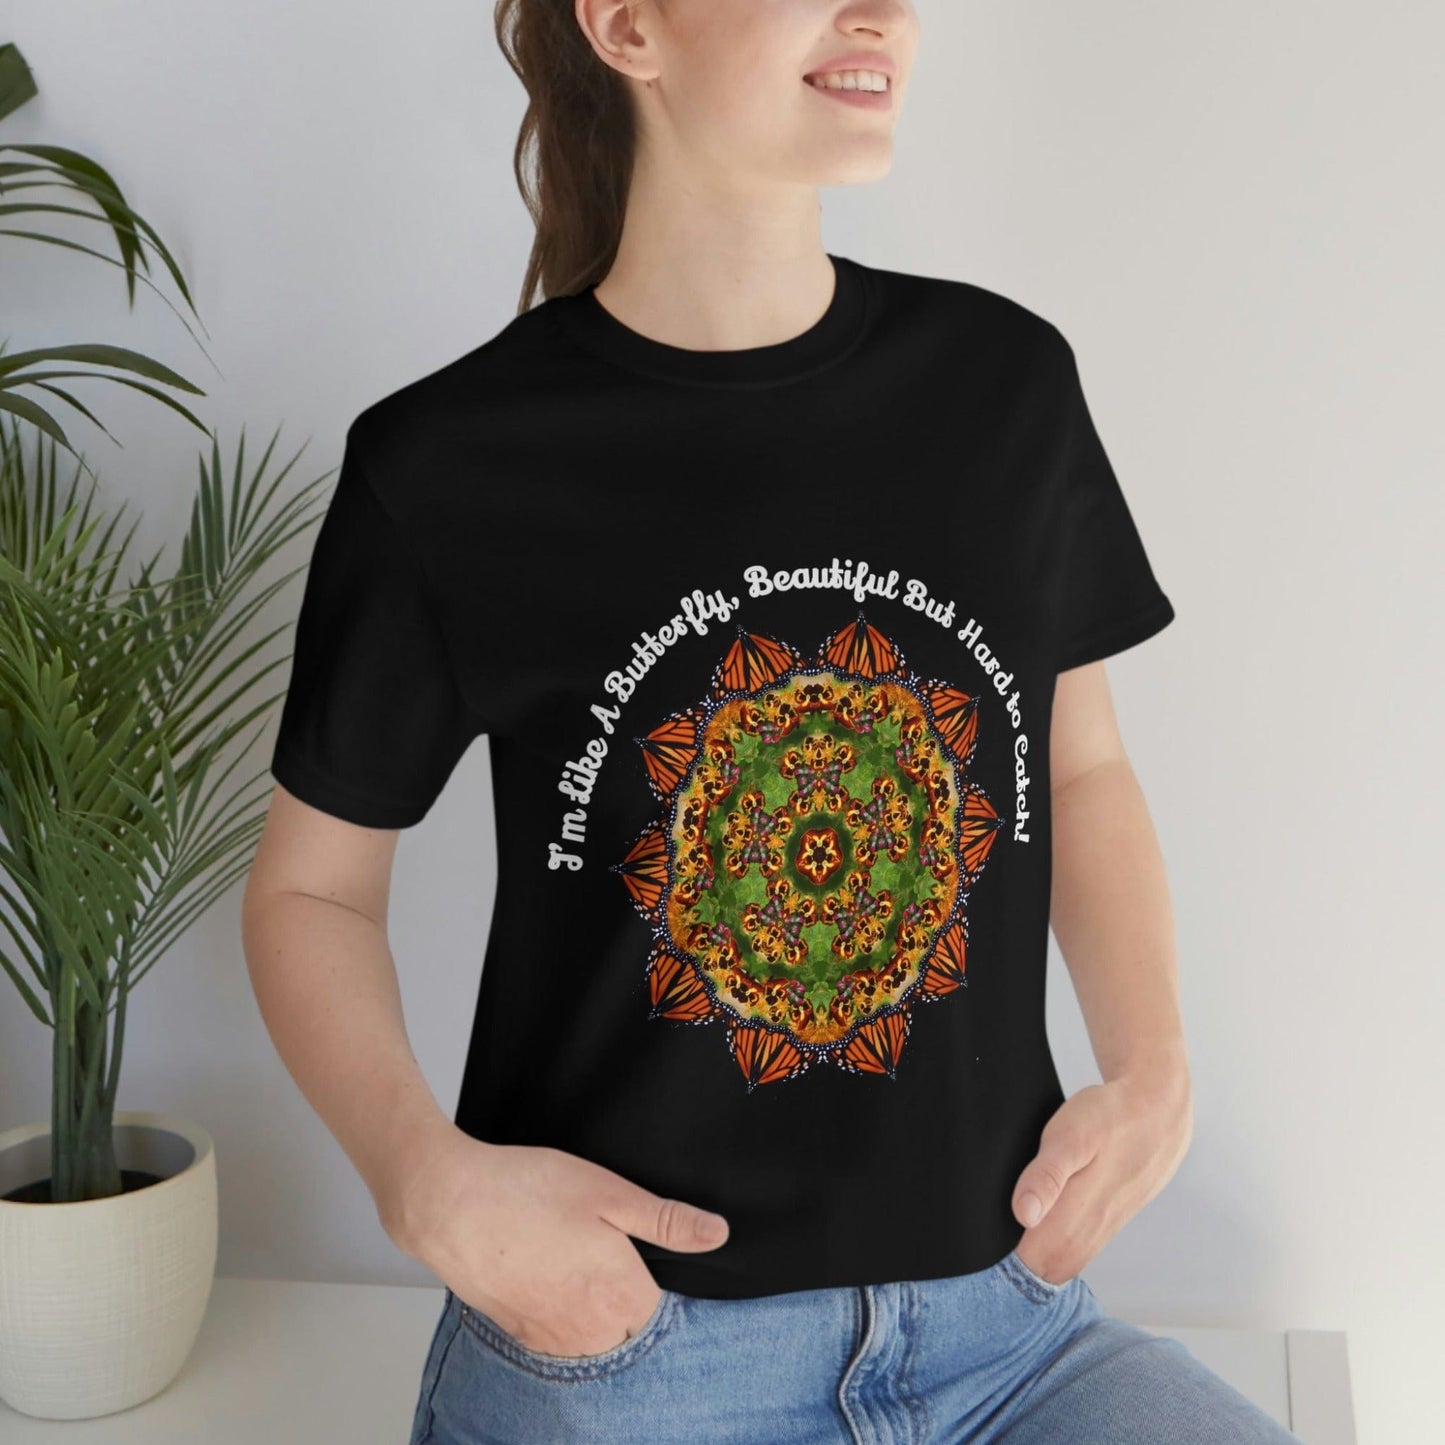 Monarch Butterfly Top, Zen Mystical Poet Shirt, Insect Shirt, Cute Shirts I'm Like A Butterfly, Beautiful But Hard To Catch